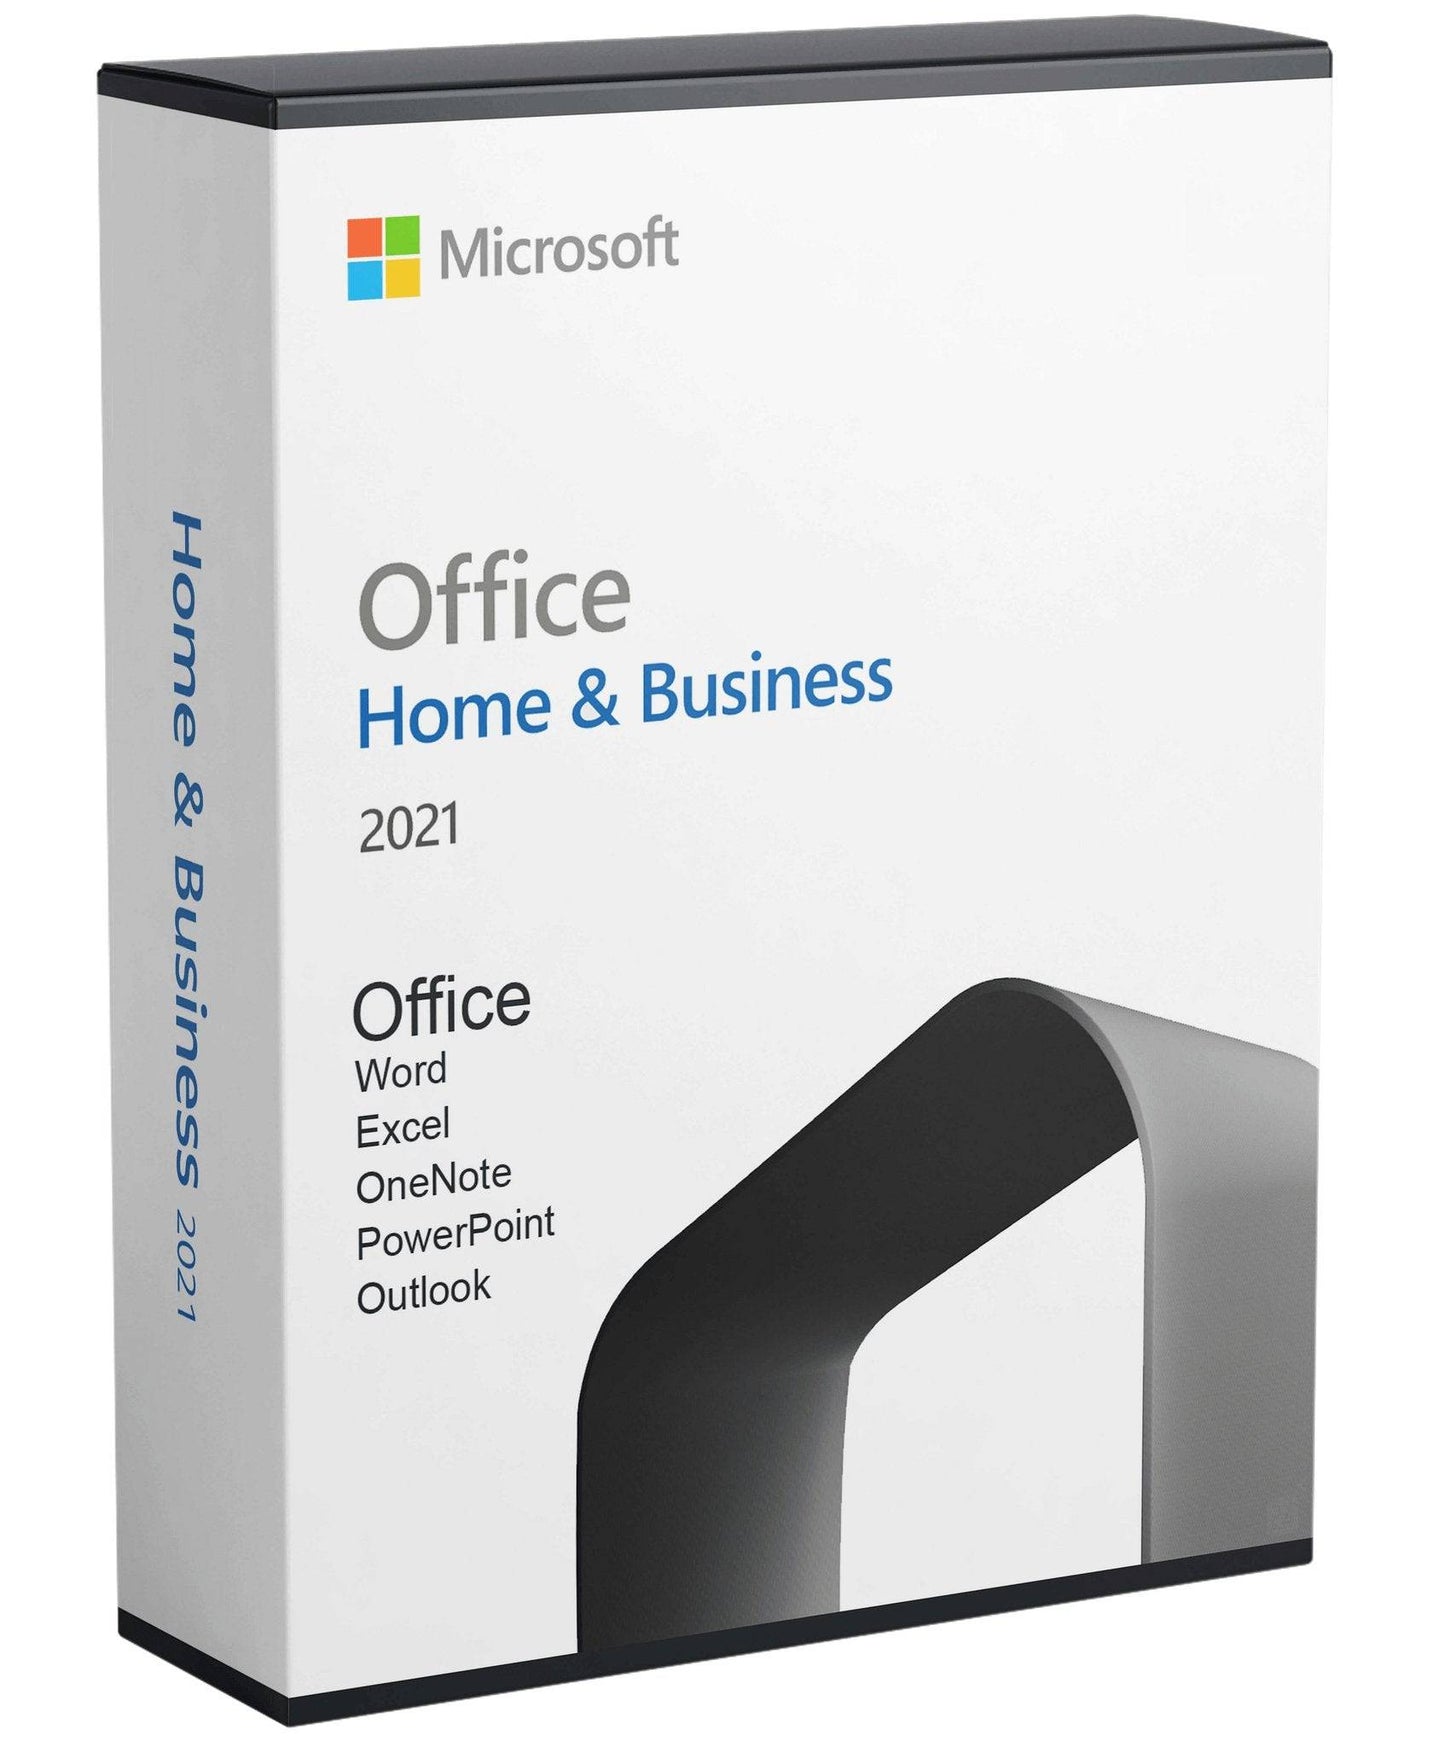 Microsoft Office 2021 Home and Business | License Activation Key for 1 PC or MAC | Full Version | Australian Stock - INFINITE-ITECH